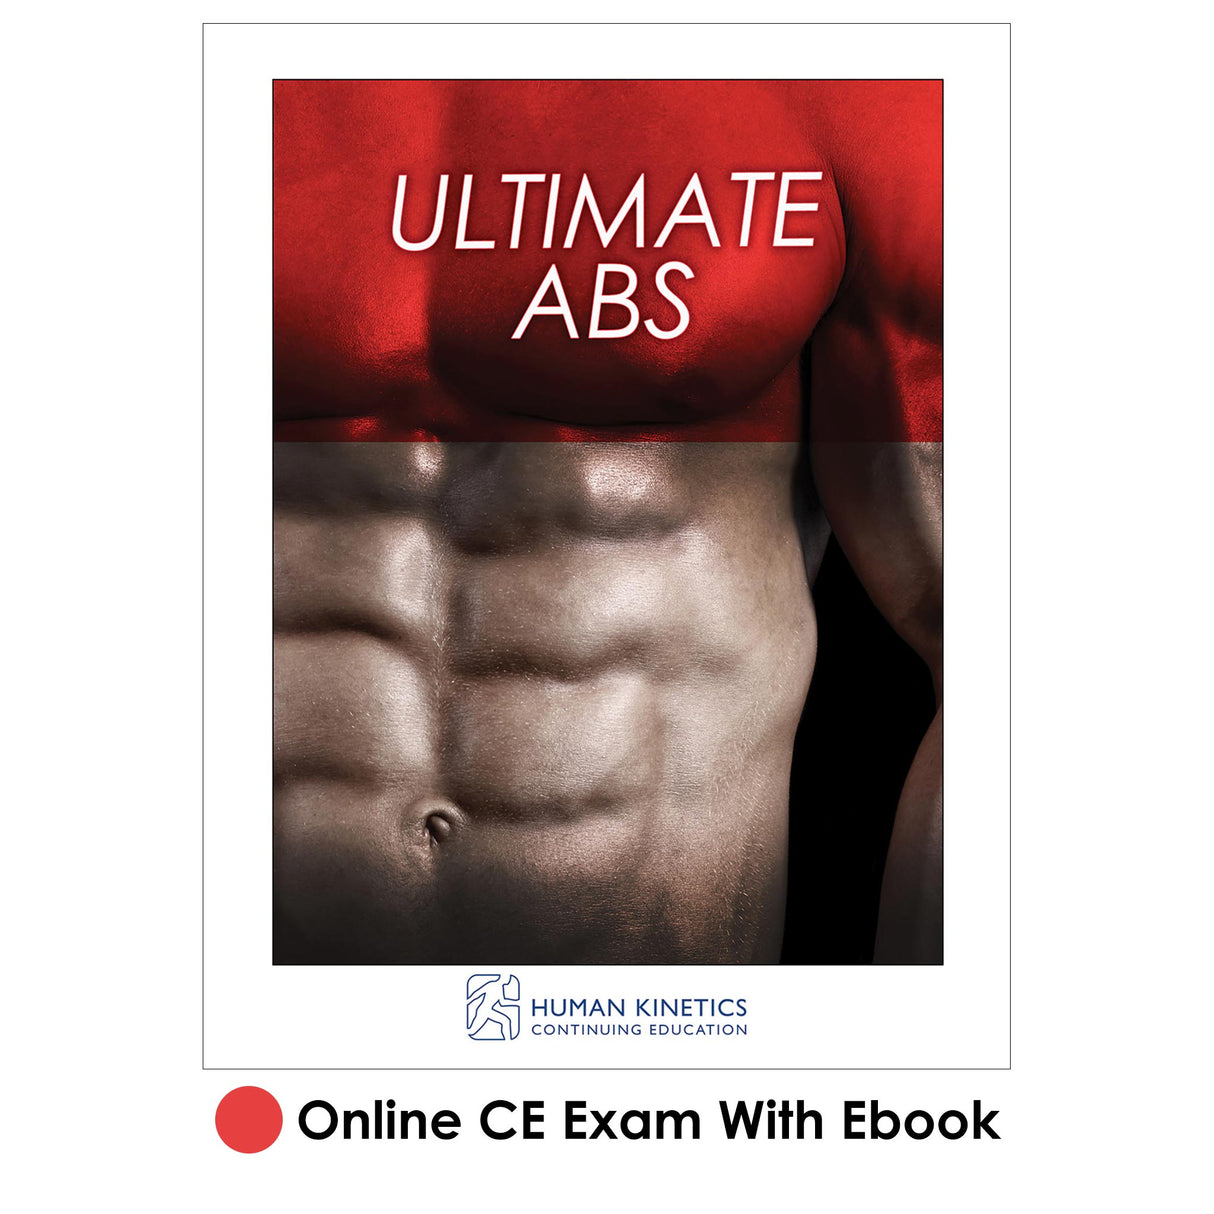 Ultimate Abs Online CE Exam With Ebook